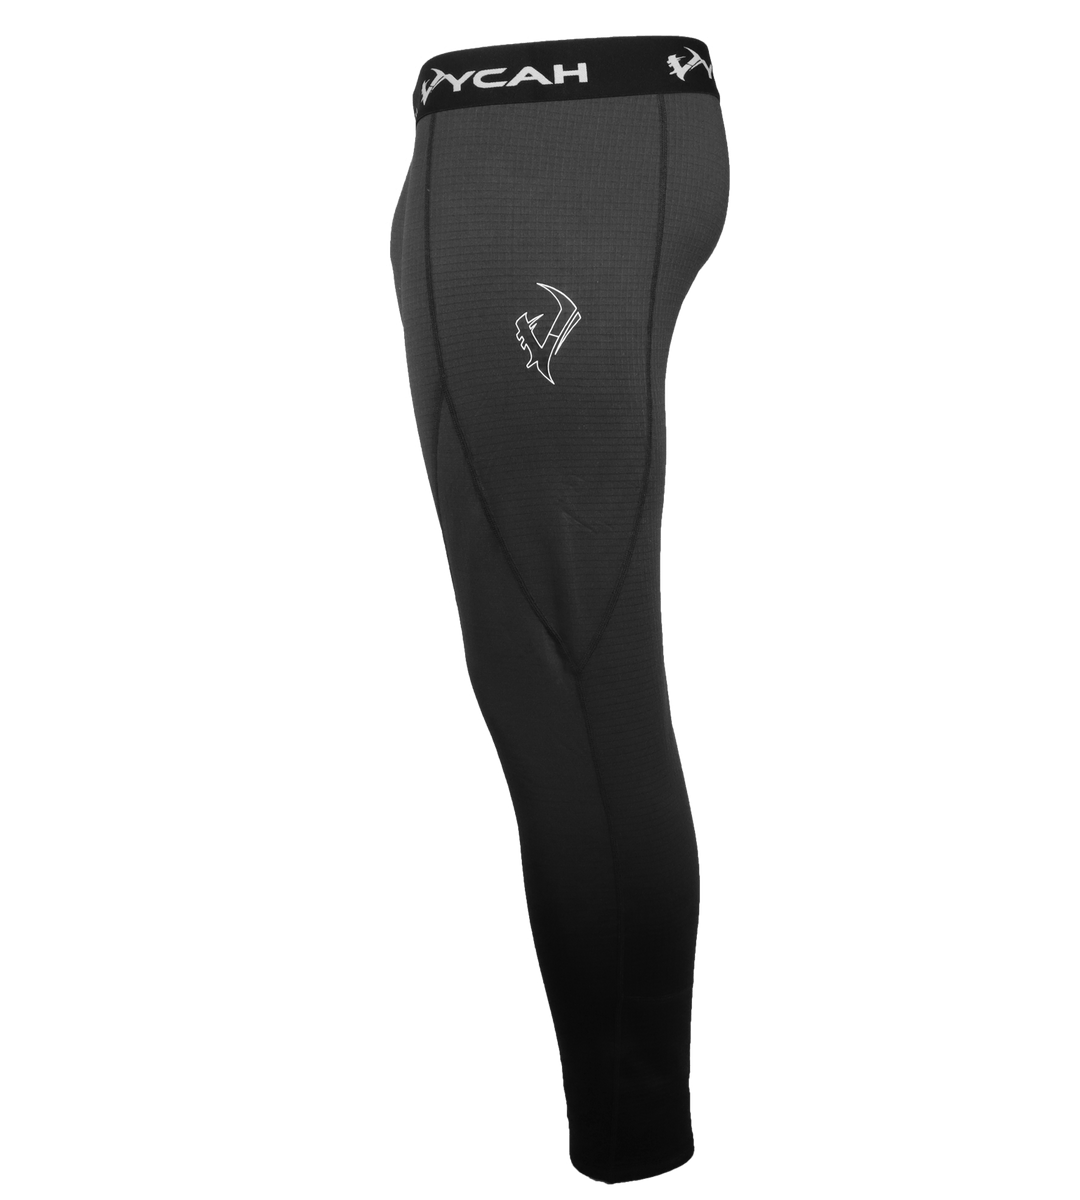 VYCAH PYREX EXTREME PANT - CHARCOAL